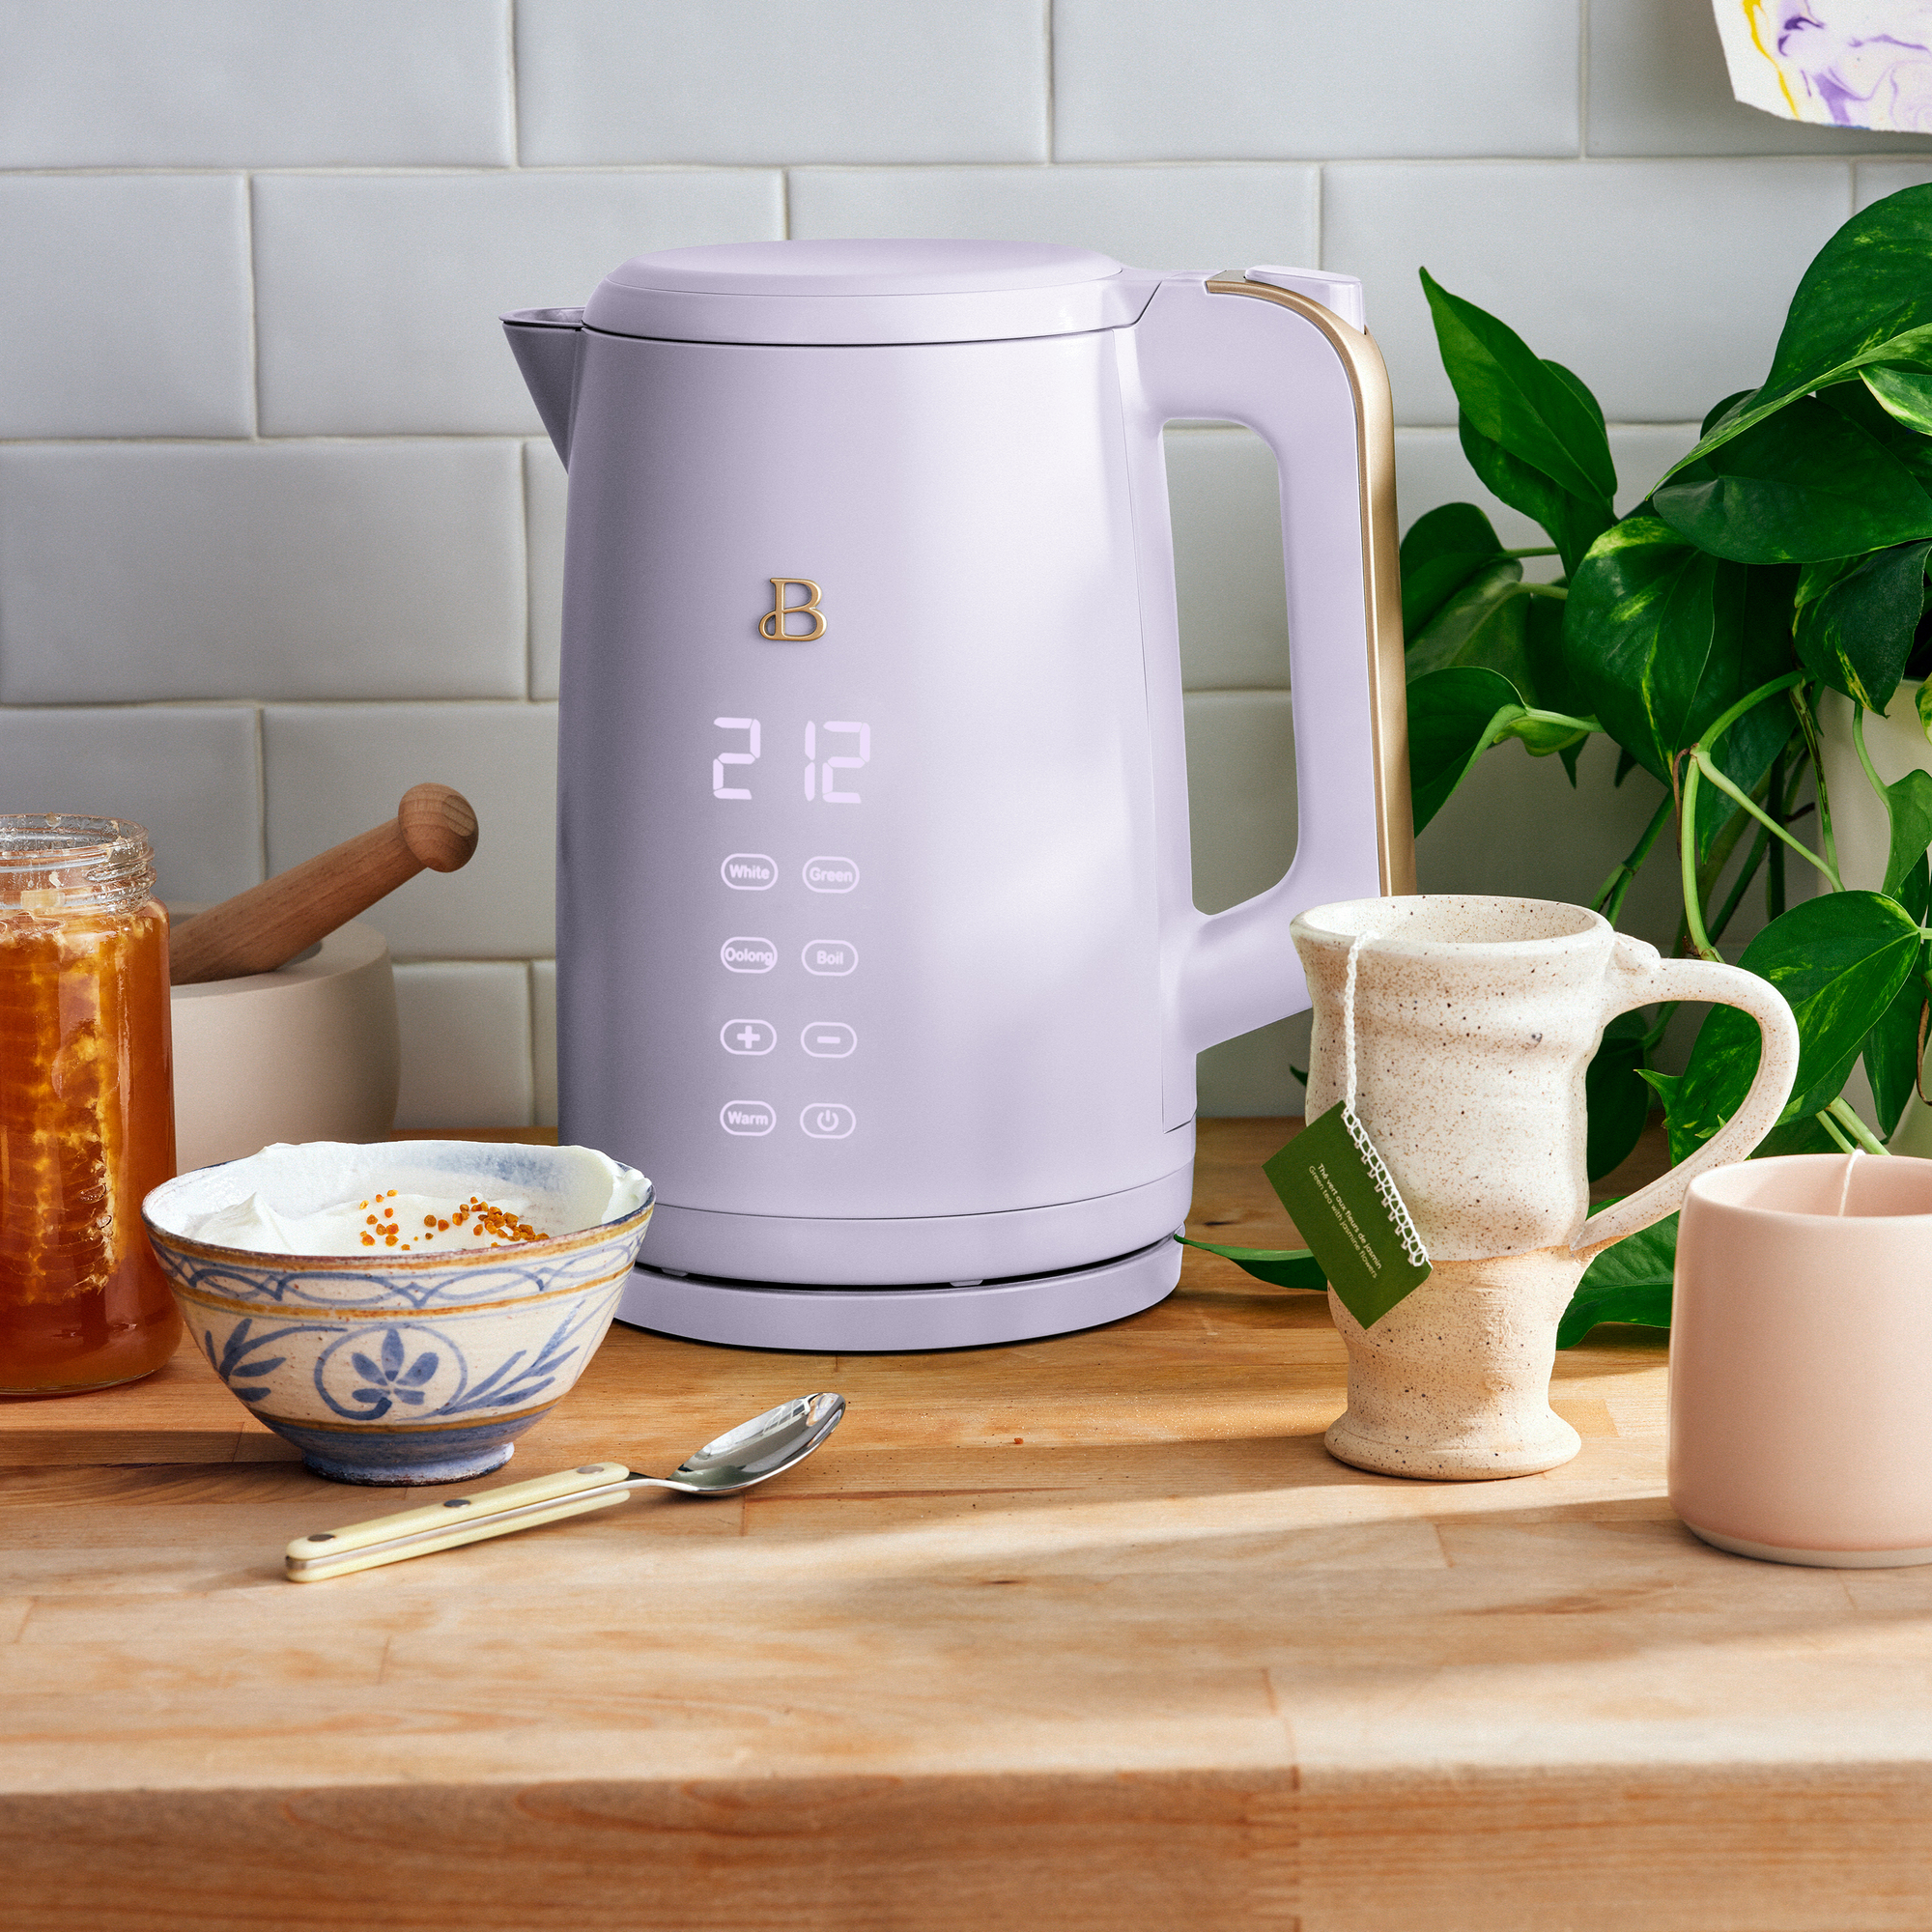 Beautiful 1.7-Liter Electric Kettle 1500 W with One-Touch Activation, Lavender by Drew Barrymore - image 2 of 6